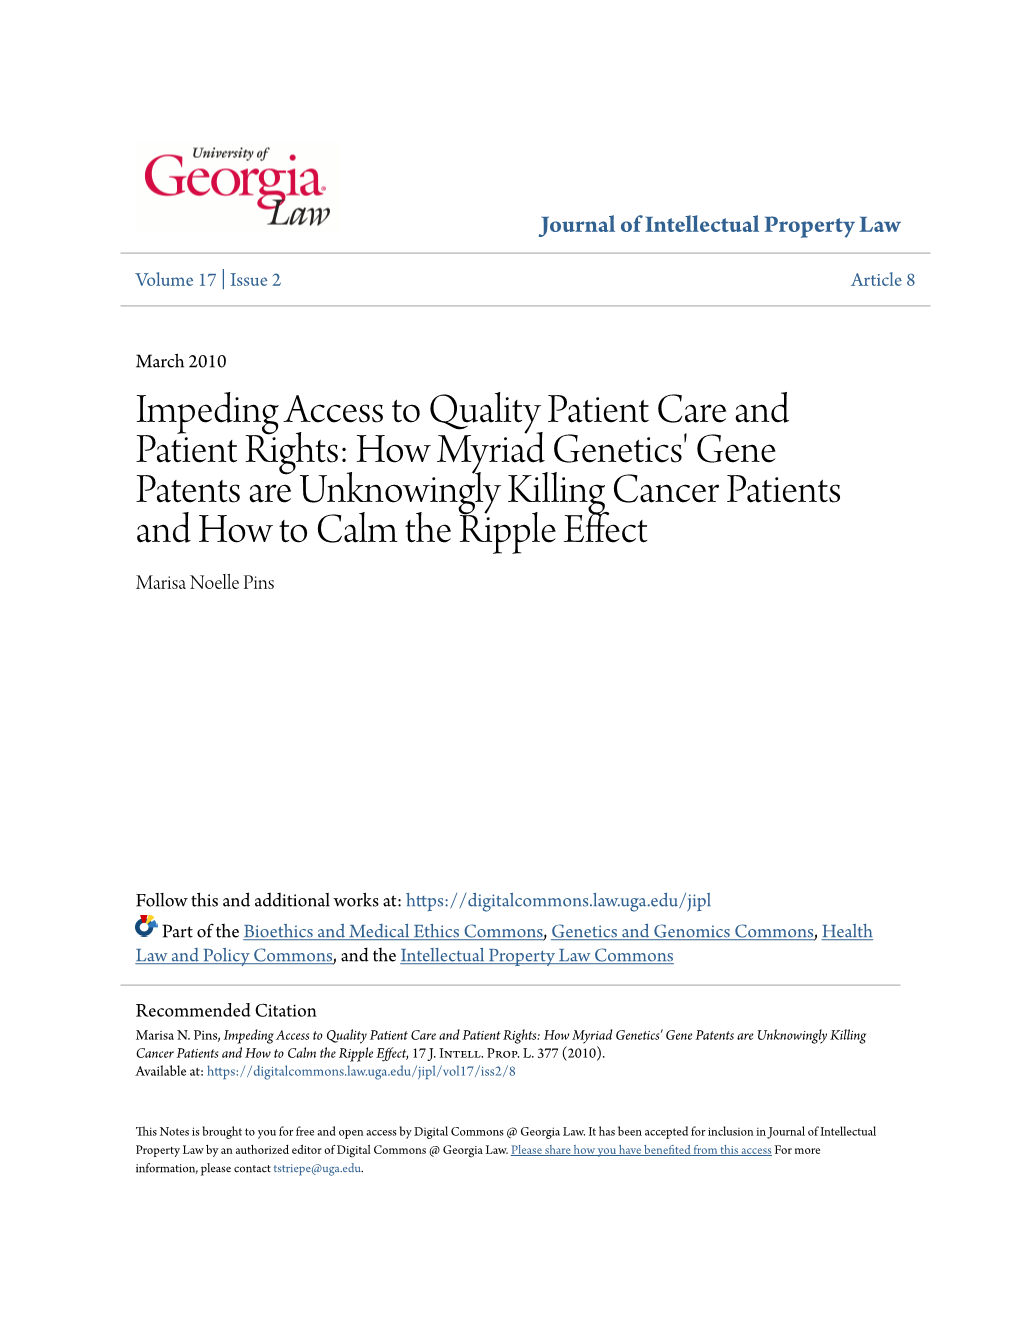 Impeding Access to Quality Patient